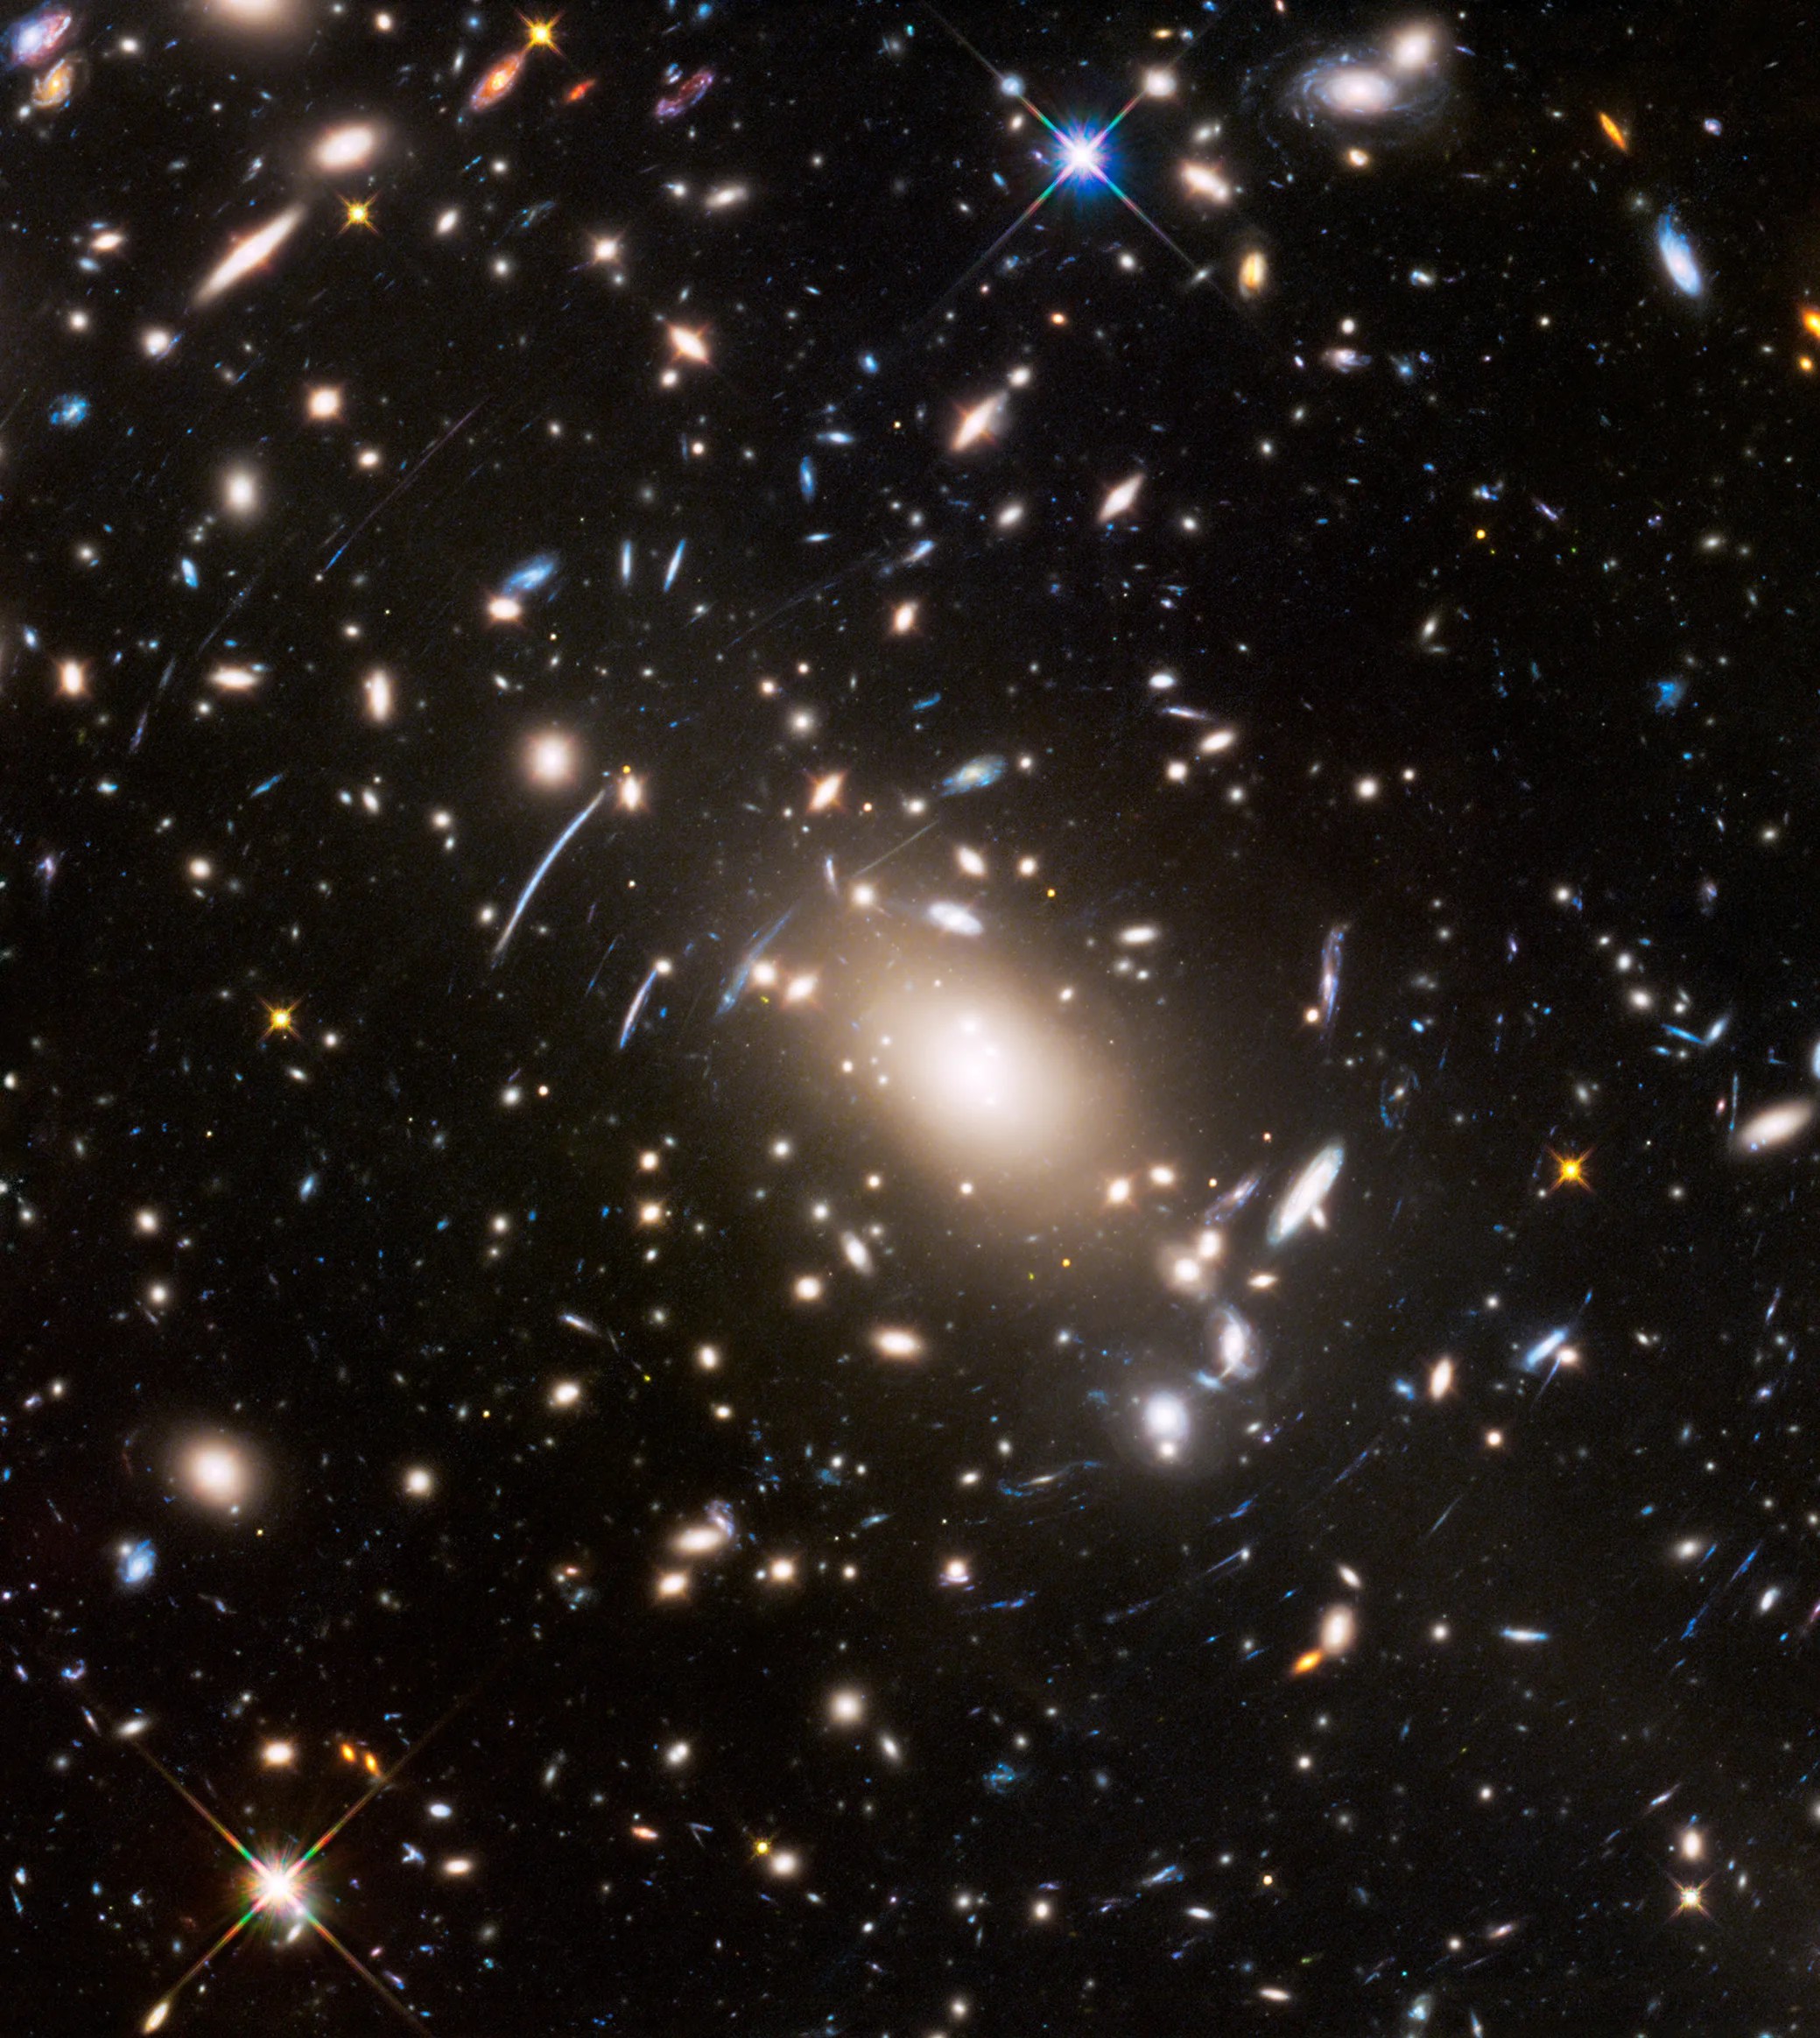 Massive cluster of galaxies with a gravitational lensing distortion effect.